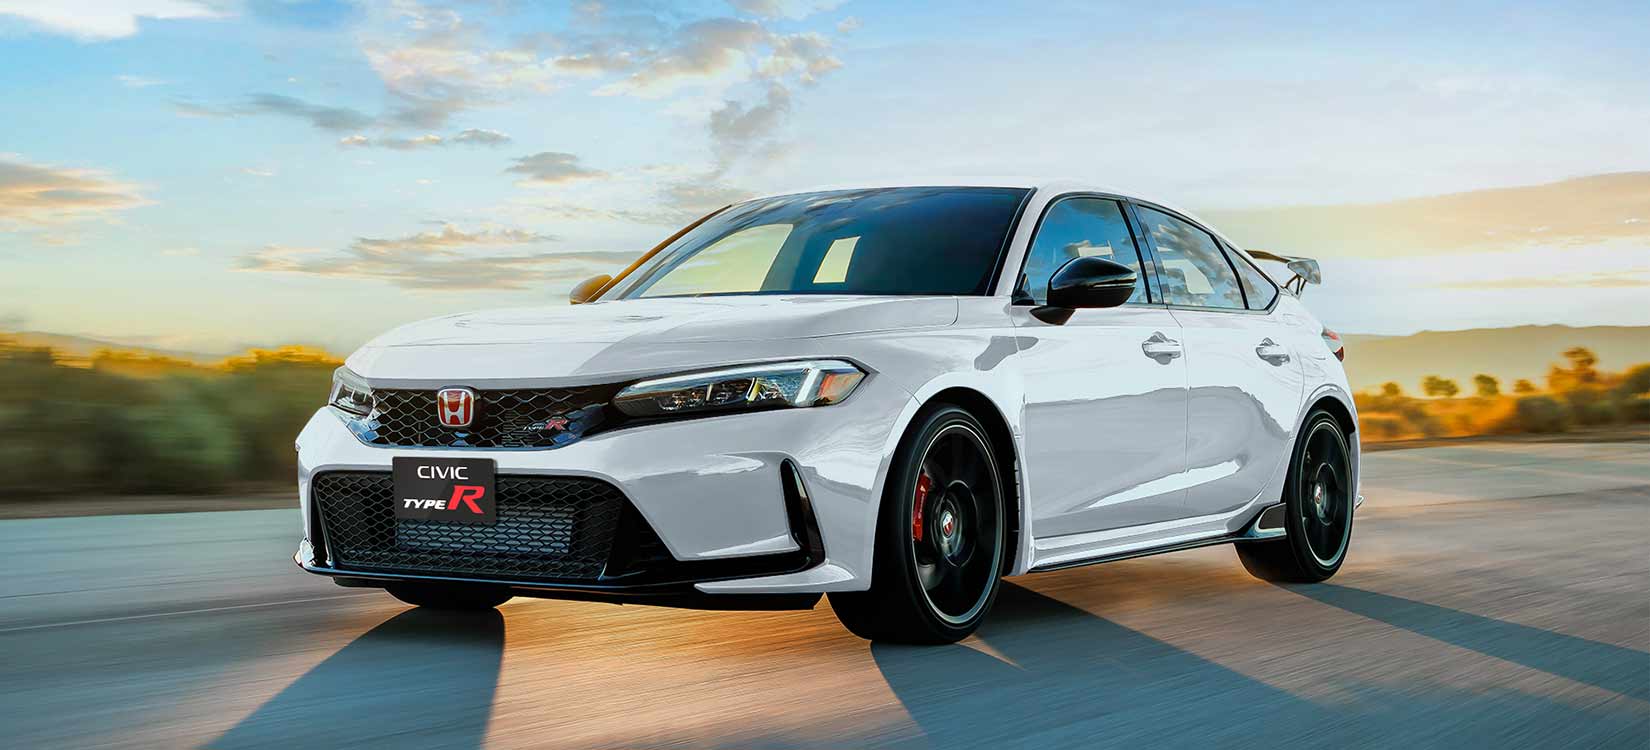 All-New Honda Civic Type R makes Philippine debut